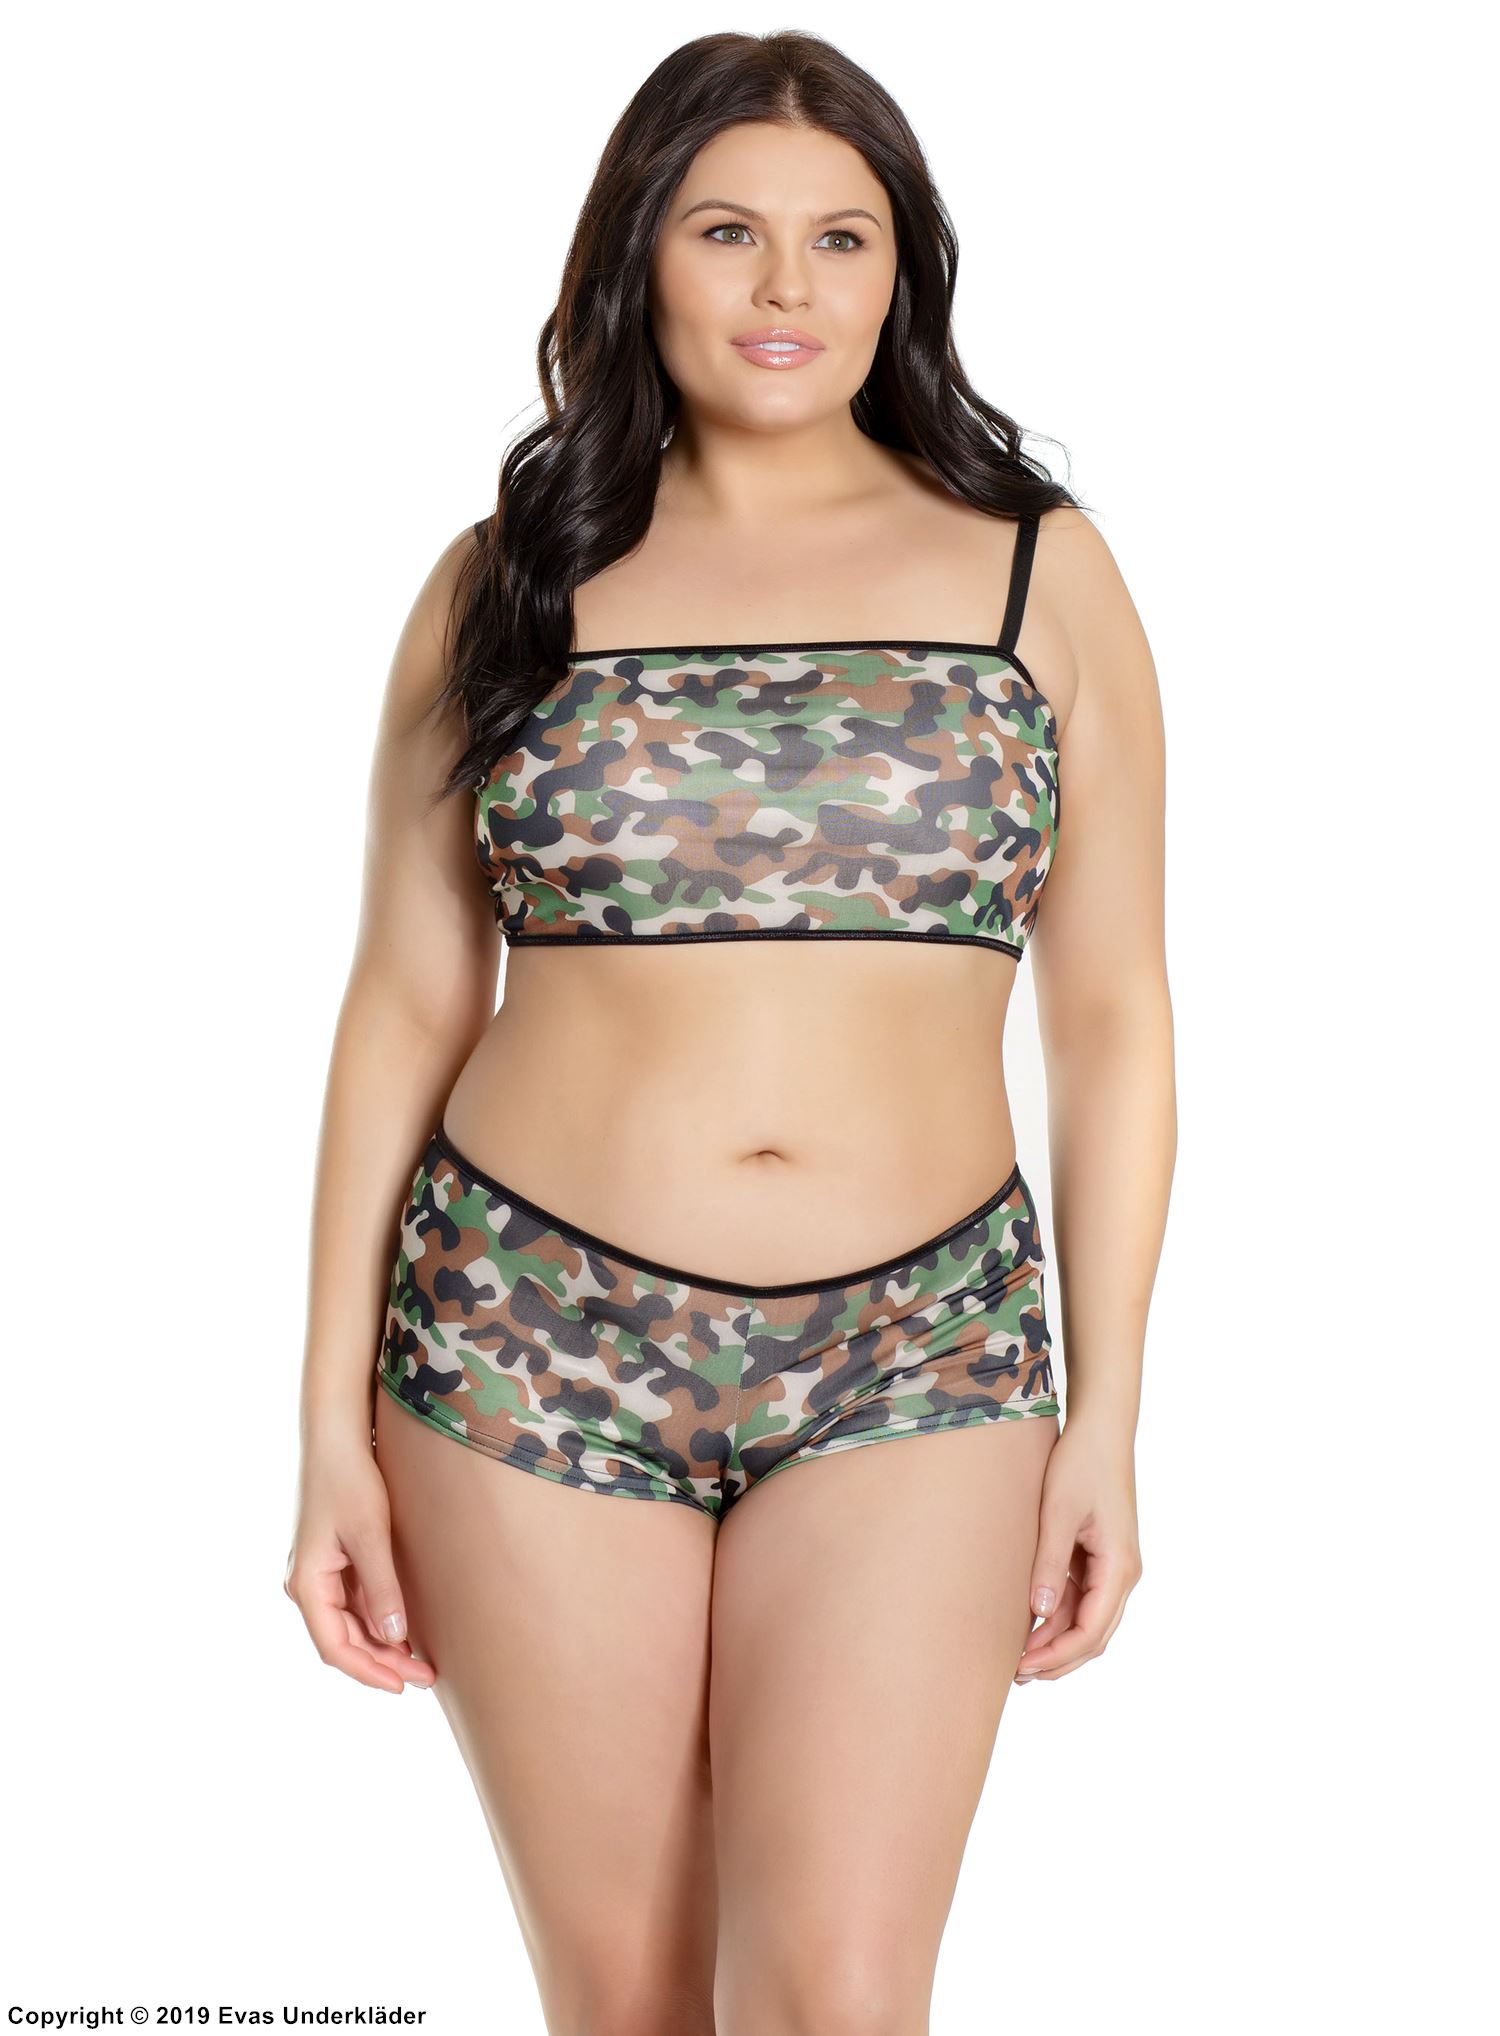 Crop top and panty, camouflage (pattern), plus size